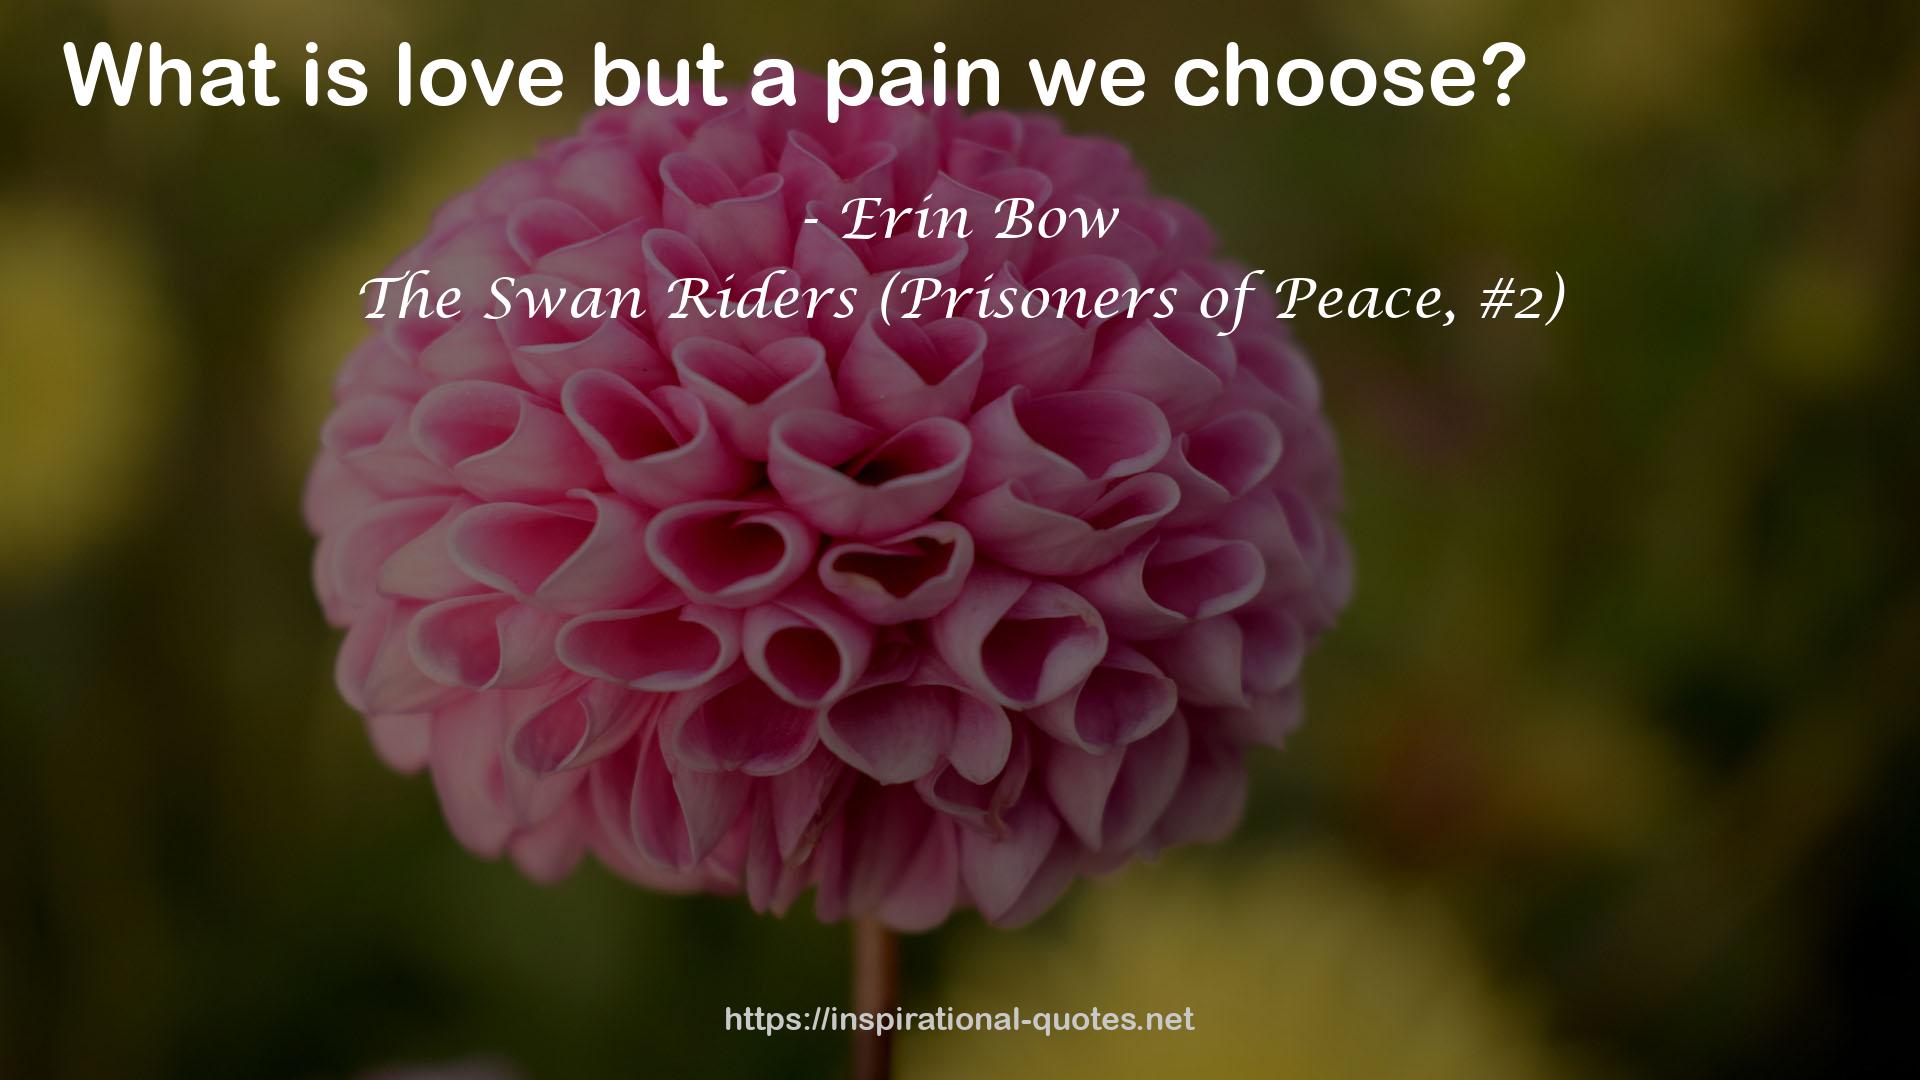 The Swan Riders (Prisoners of Peace, #2) QUOTES